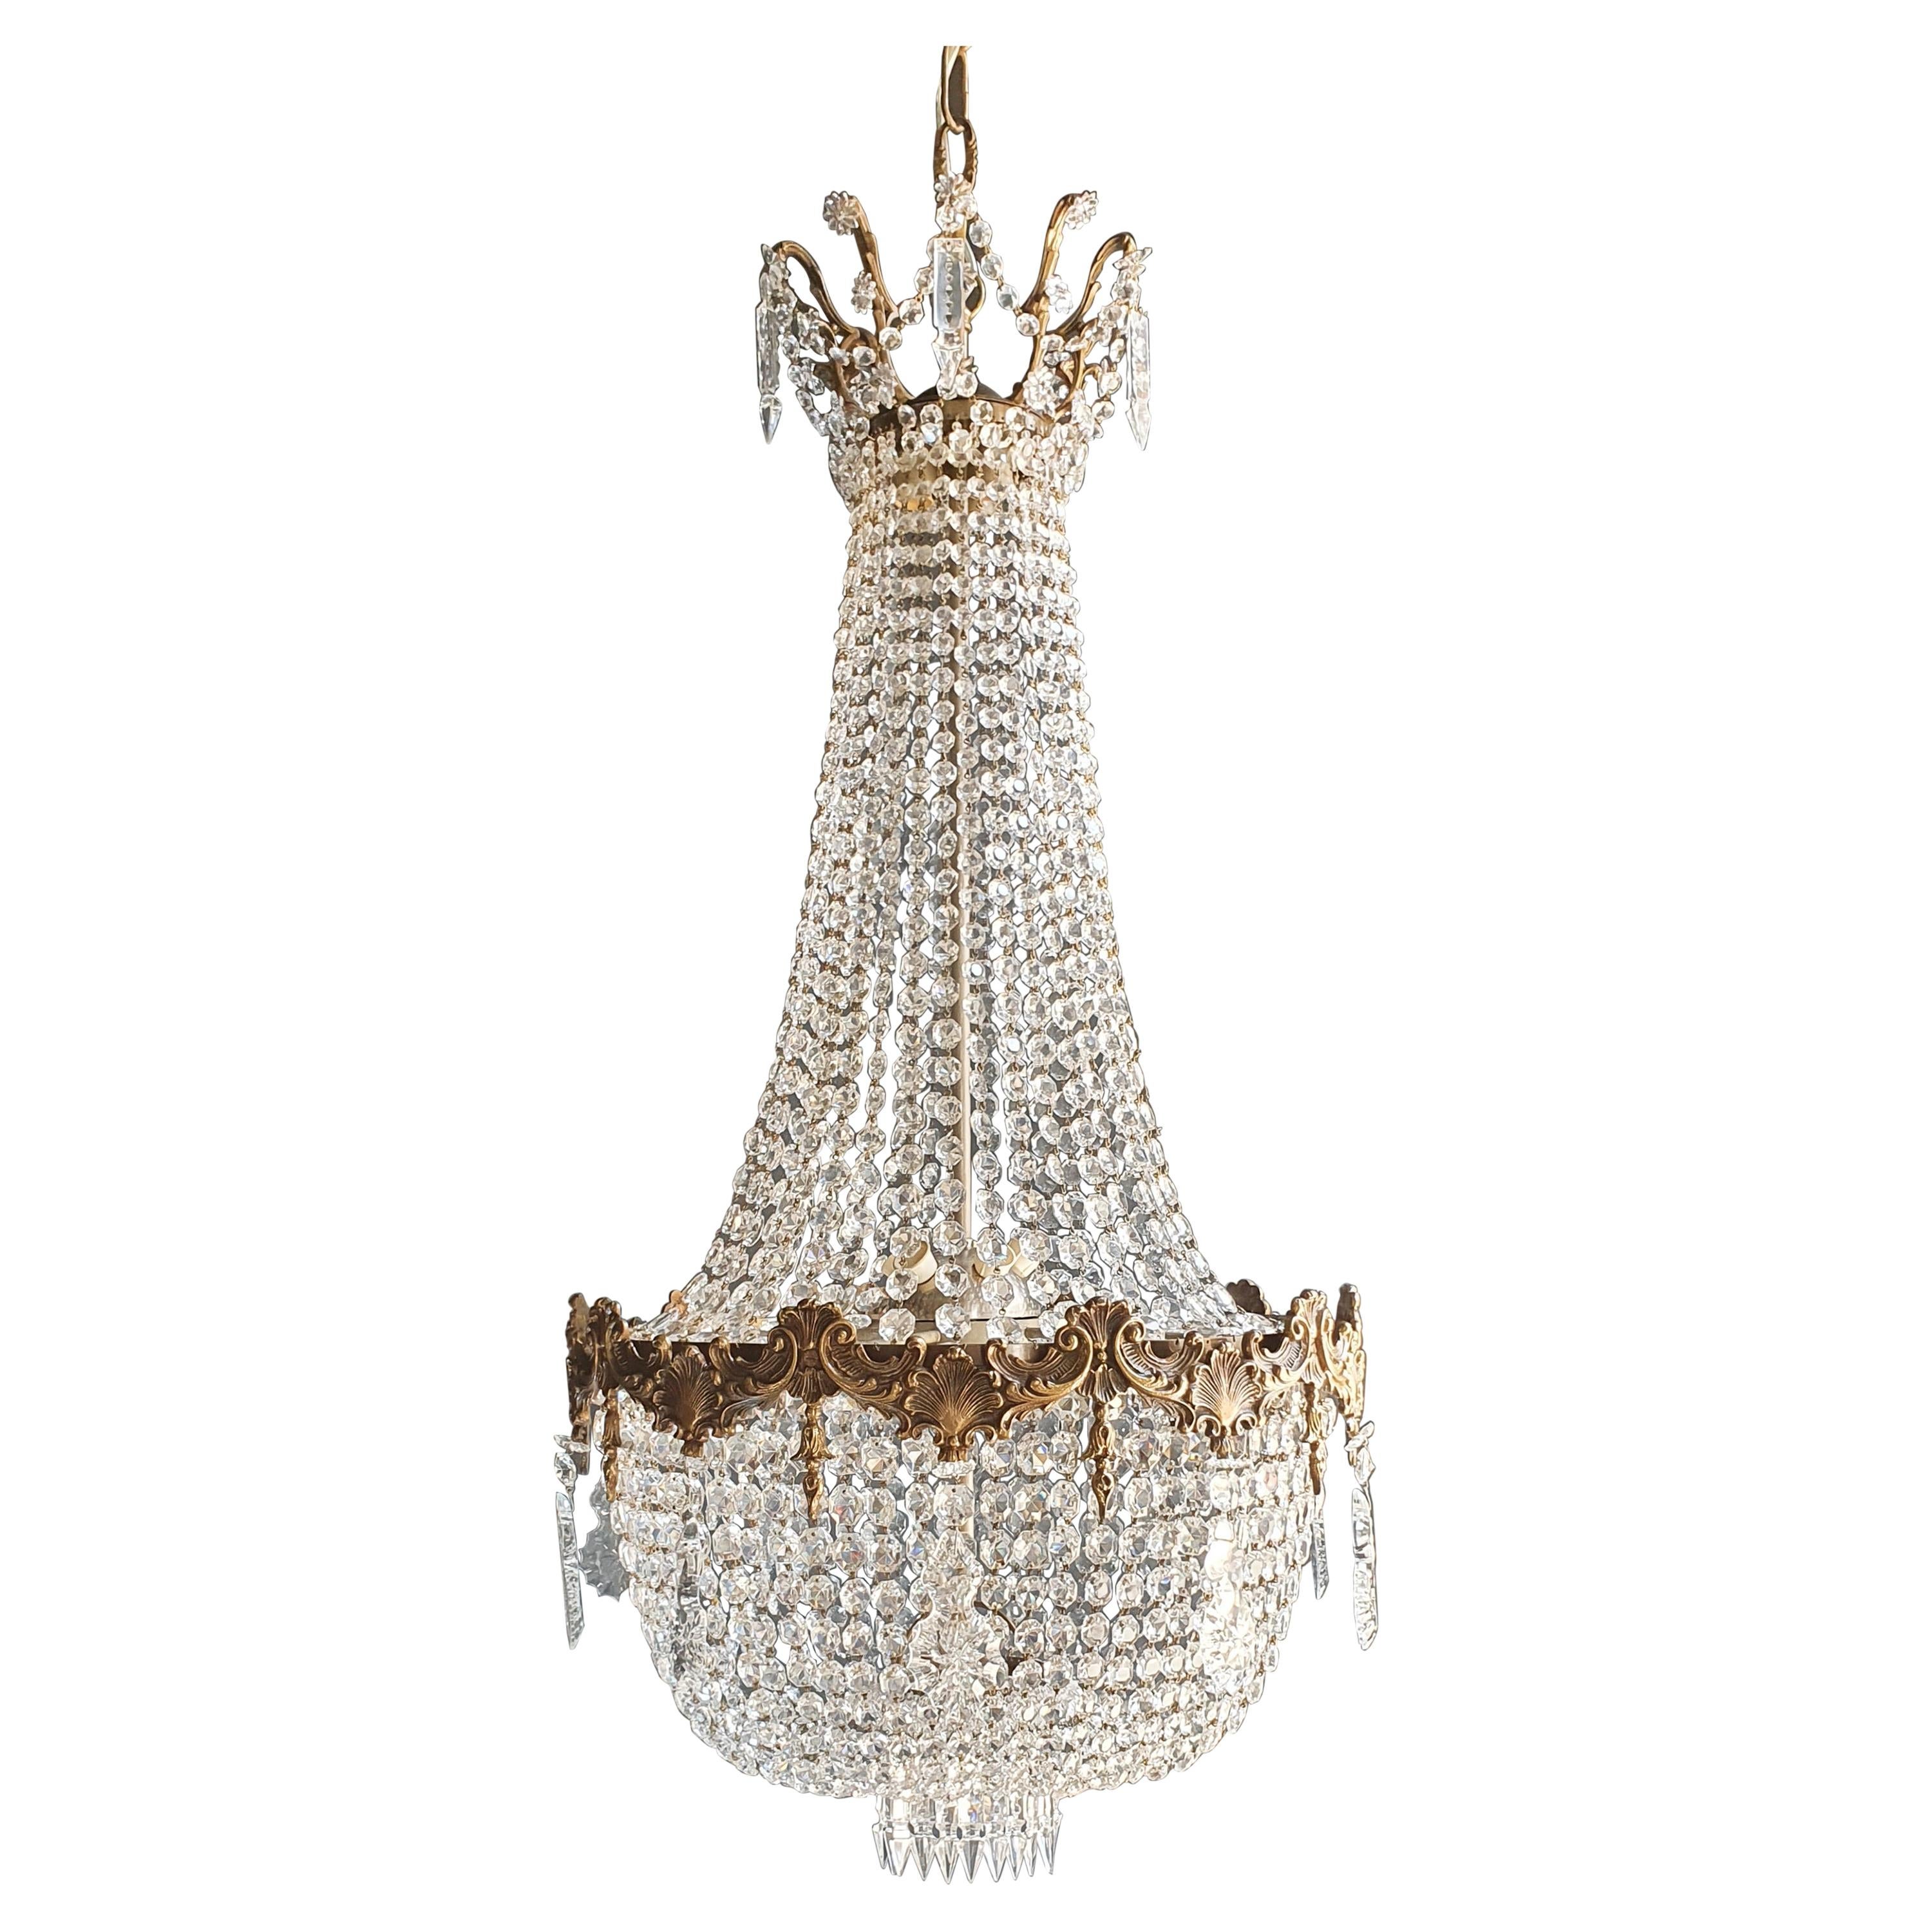 Empire Brass Sac a Pearl Chandelier Crystal Lustre Ceiling Antique